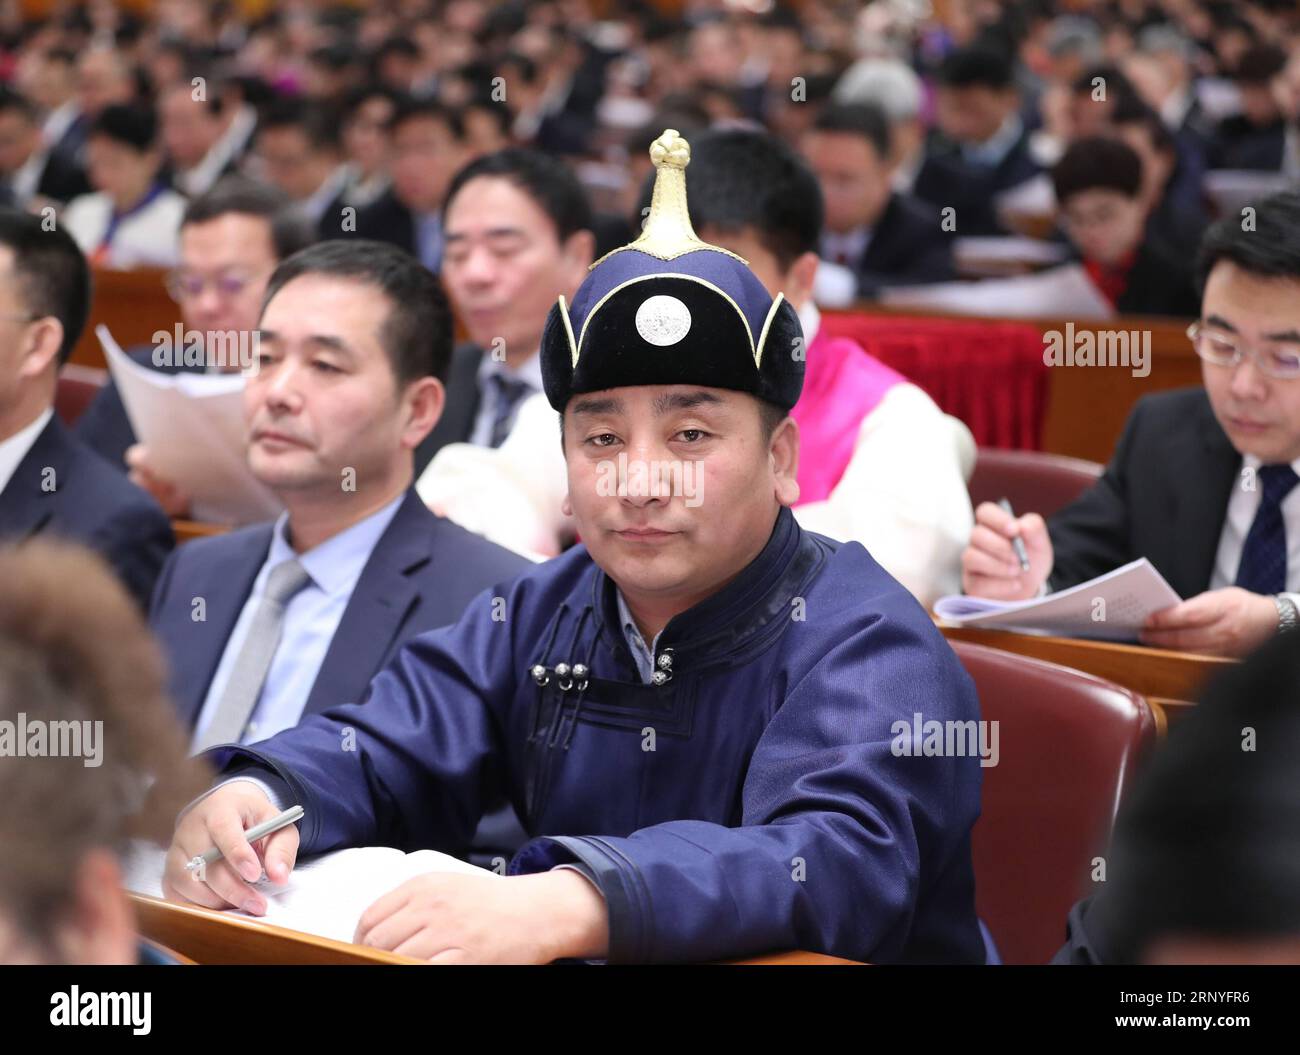 (180318) -- BEIJING, March 18, 2018 -- Wu Yunbo, a newly-elected deputy to the 13th National People s Congress (NPC), attends the opening meeting of the first session of the 13th NPC at the Great Hall of the People in Beijing, capital of China, March 5, 2018. Wu Yunbo of Mongolia ethnic group comes from Dongsala Village of Jarud Qi (County) of north China s Inner Mongolia Autonomous Region. As a secretary of the Communist Party of China local branch in the Dongsala Village, he initiated a cooperative in 2013 and explored a way to get people out of poverty. Farmers and herdsmen were encouraged Stock Photo